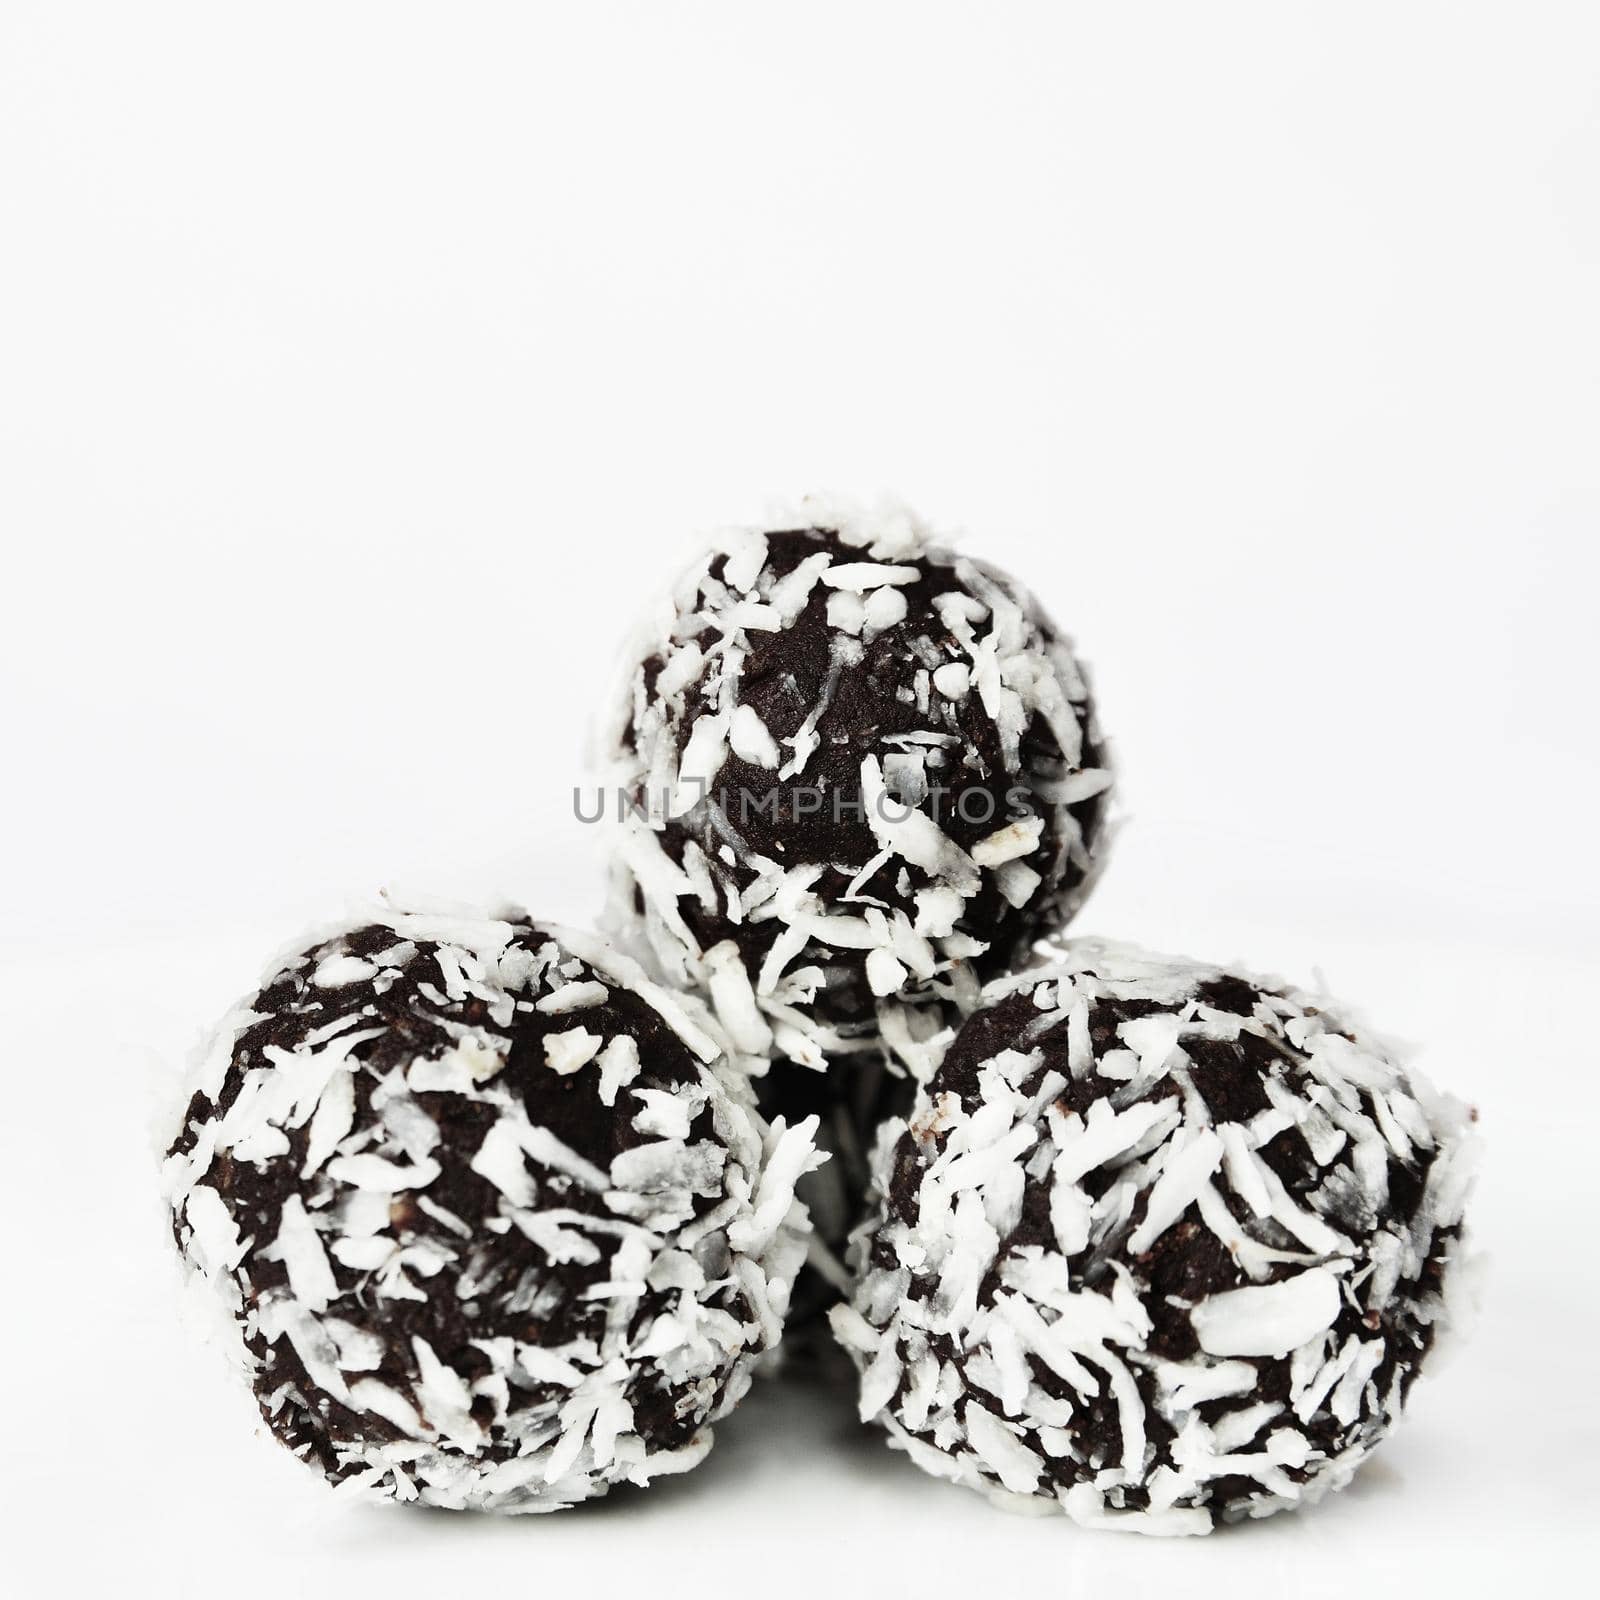 Christmas sweets on a plate - Rum balls in coconut. Traditional homemade handmade Czech sweets.